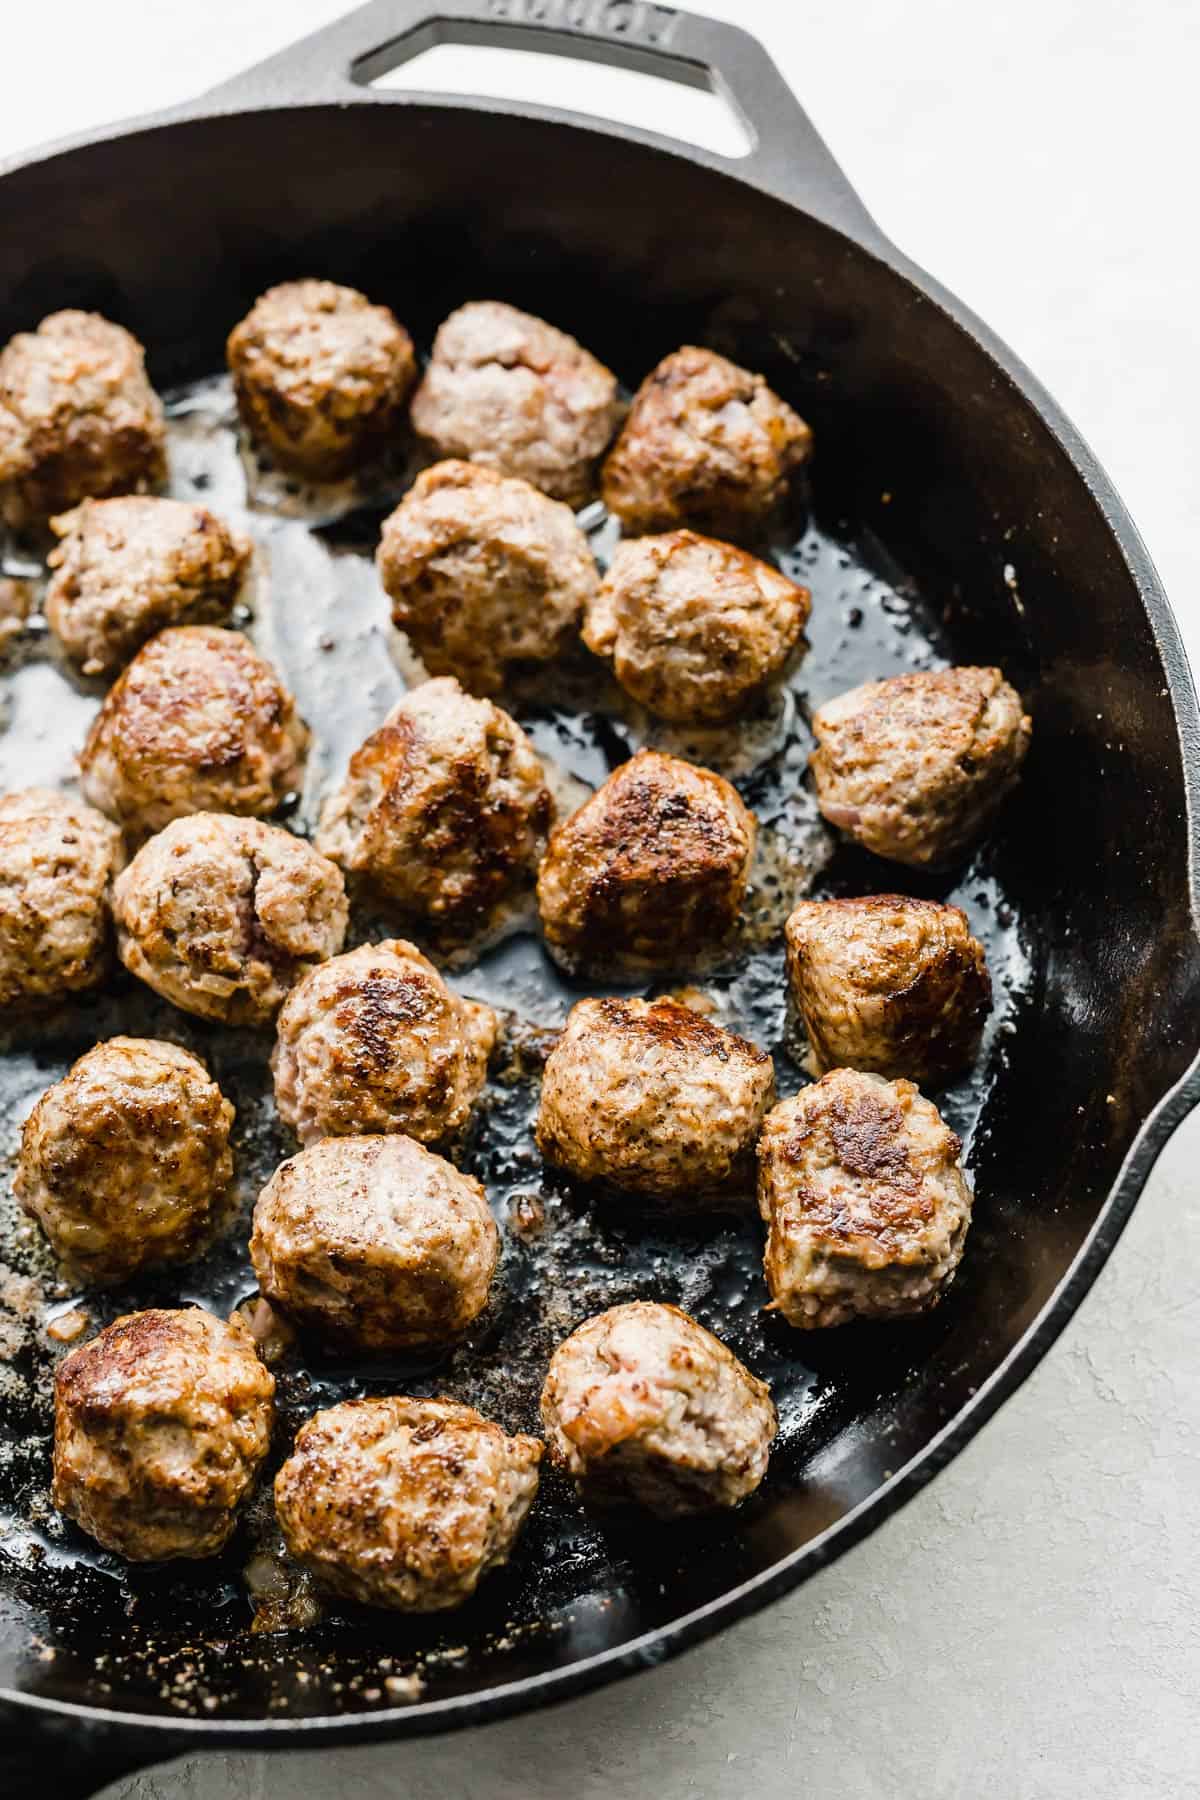 A black skillet with browned meatballs in it.